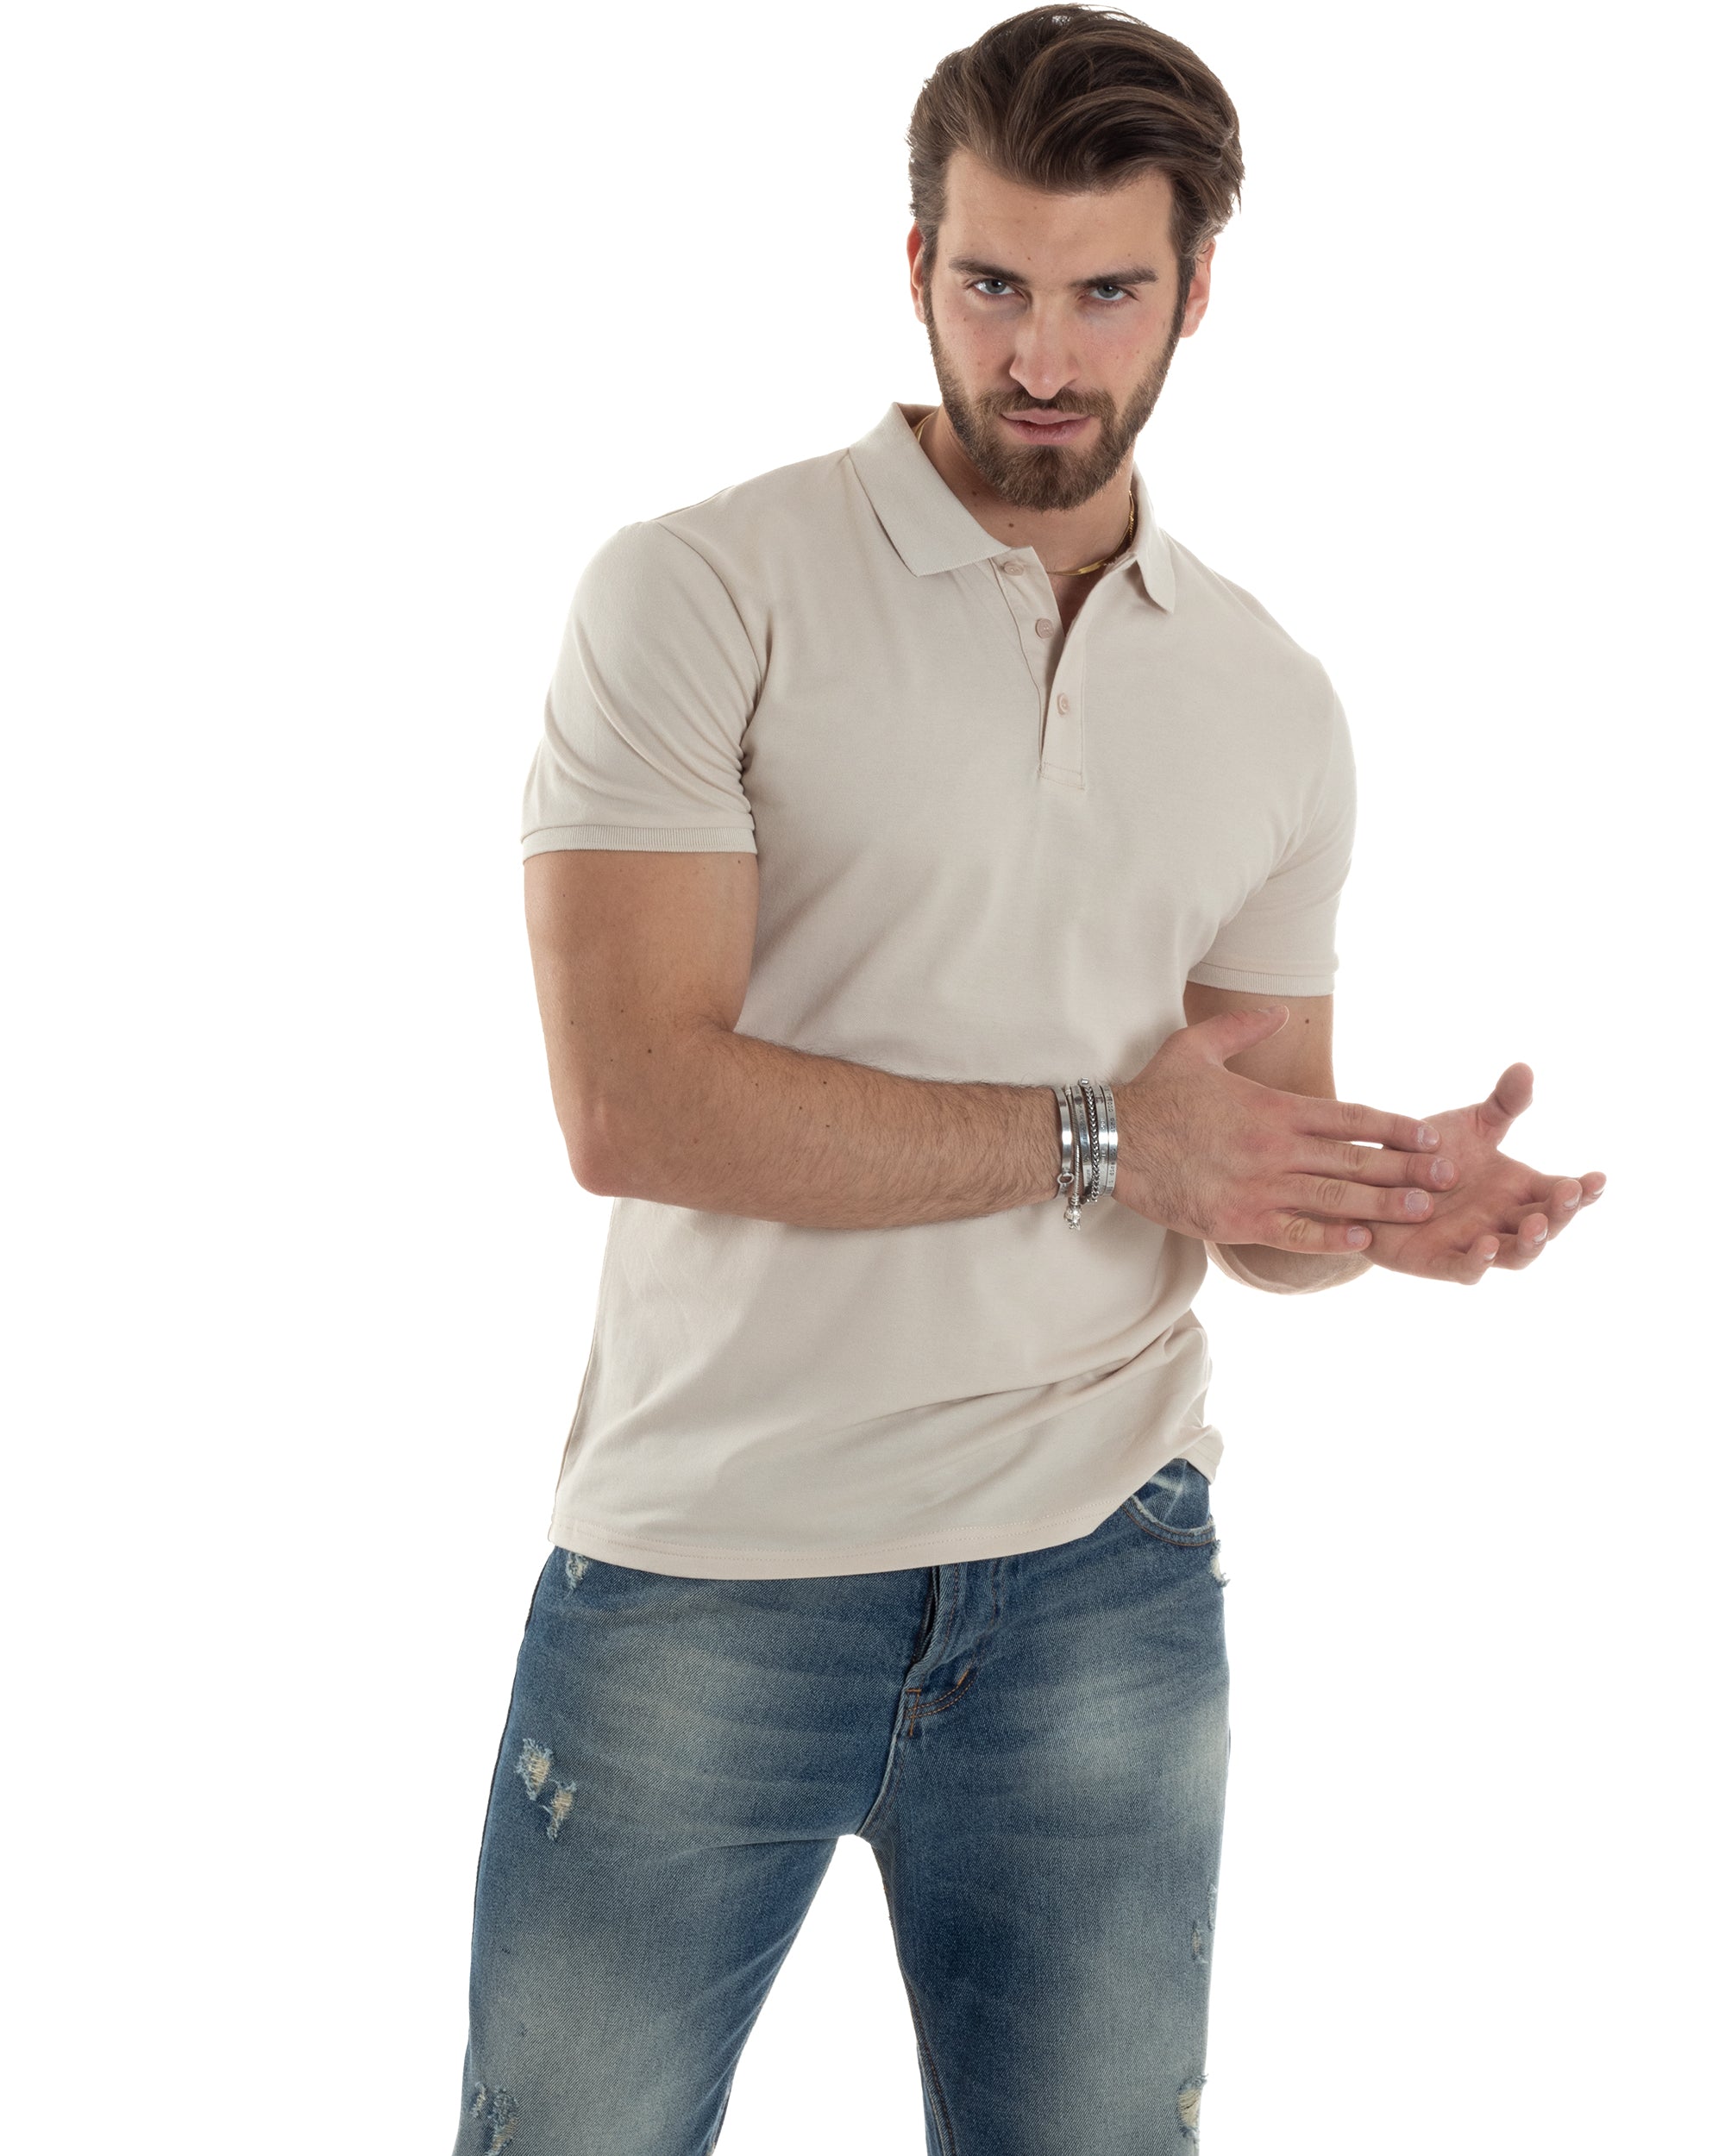 Men's T-shirt Polo Solid Color Black Short Sleeve Button Collar Basic Casual GIOSAL-TS2971A